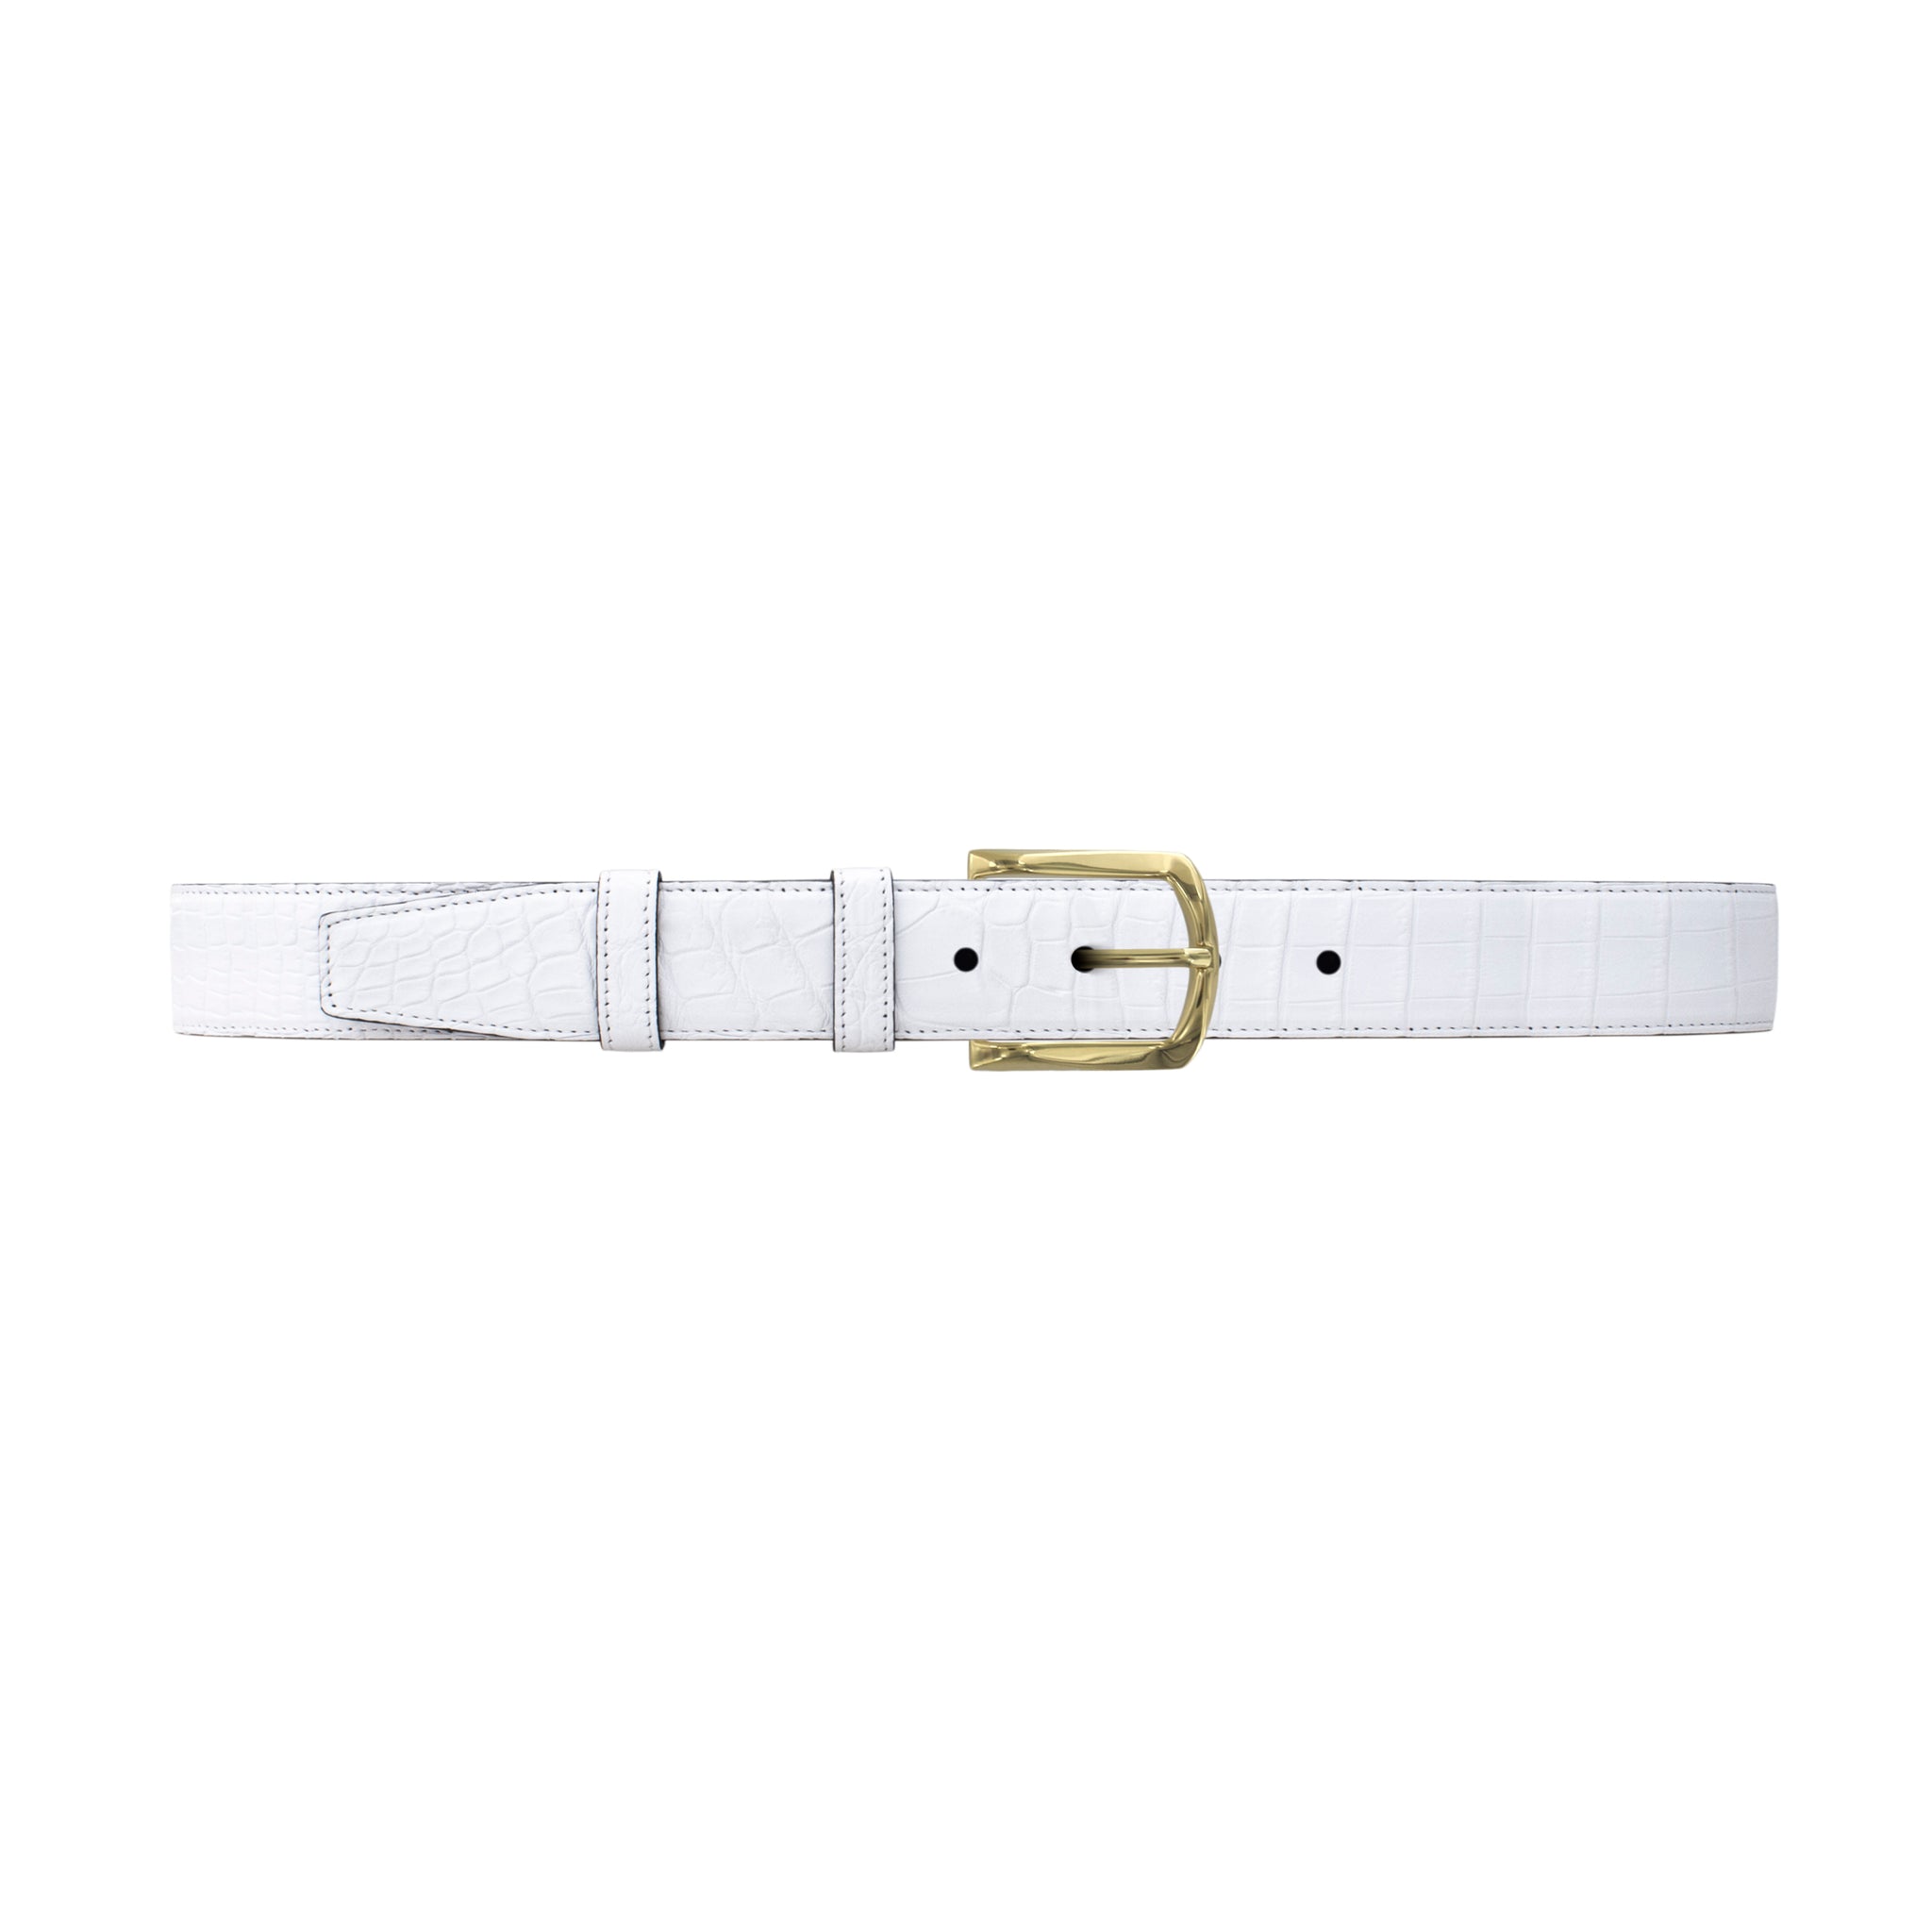 1 1/4" White Classic Belt with Sutton Dress Buckle in Brass